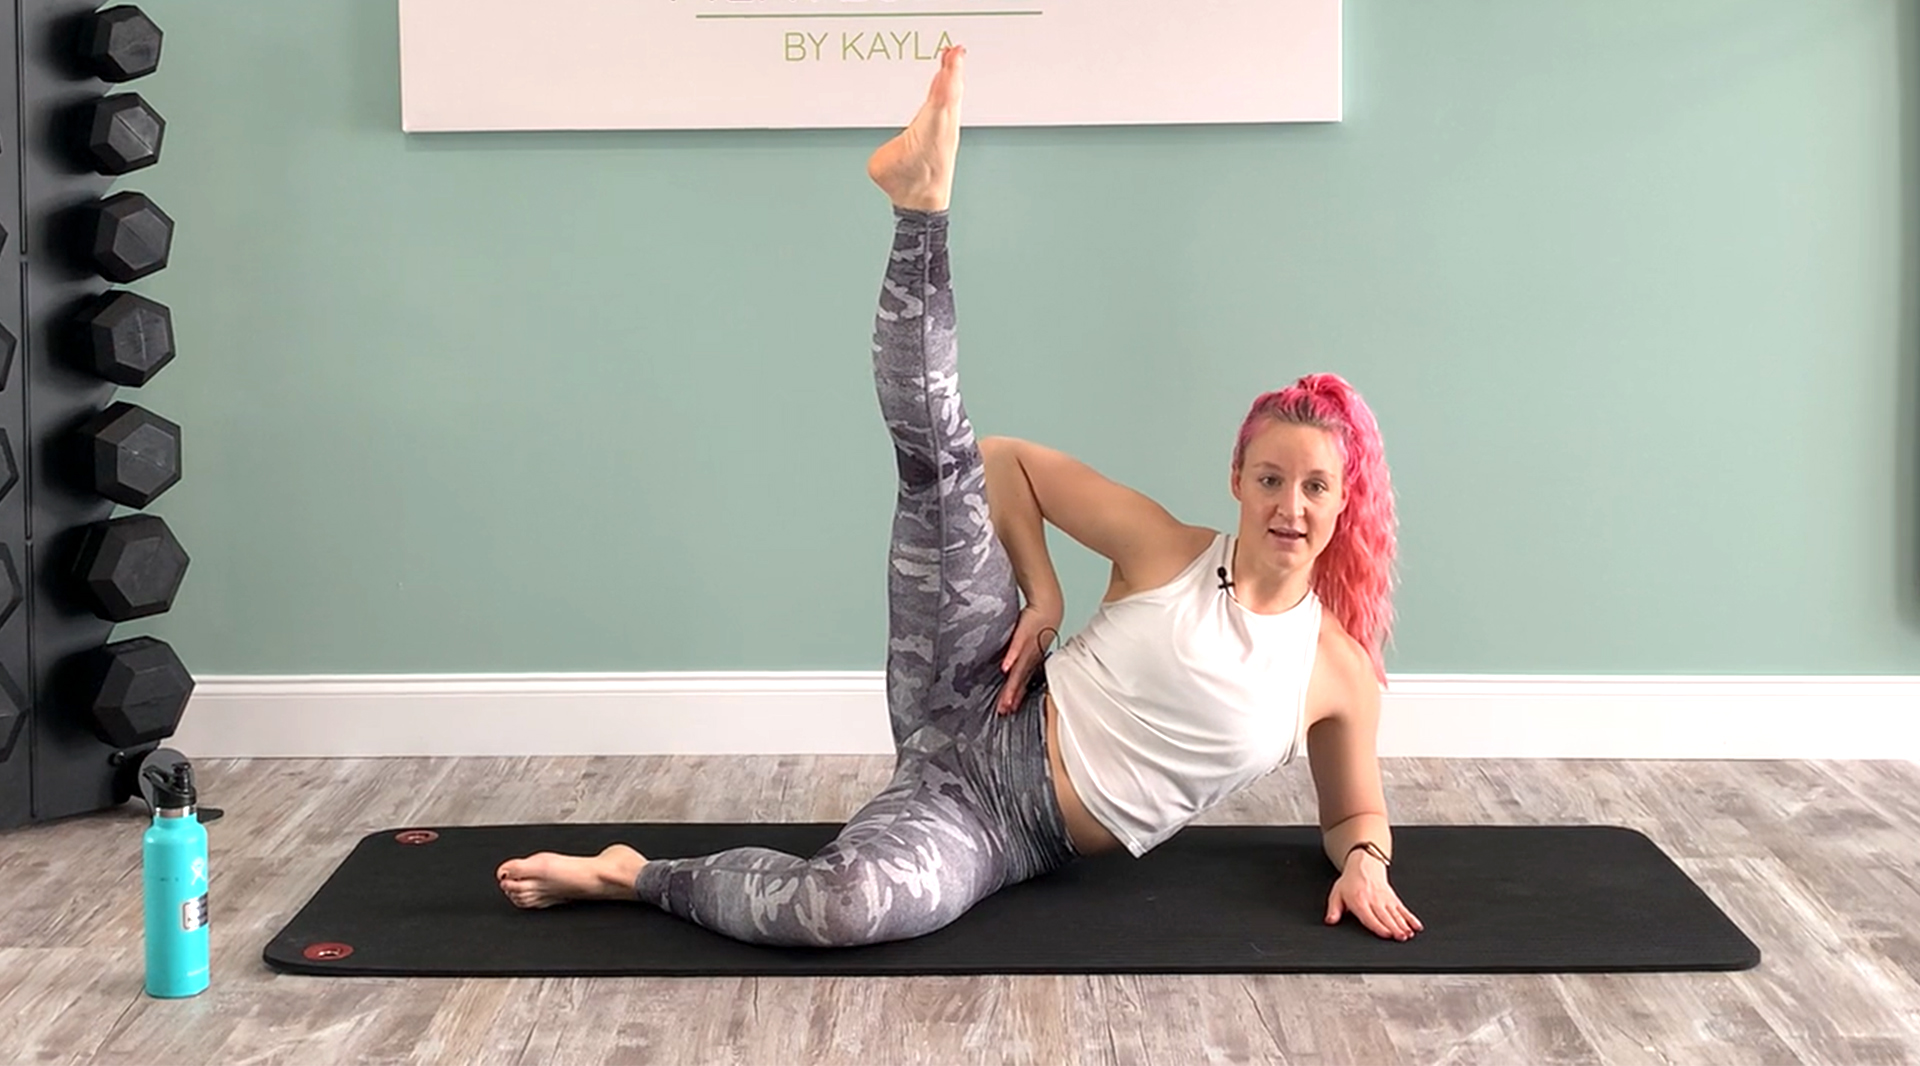 7 Pilates Exercises for Beginners Starting At Home - PILATESBODY by Kayla